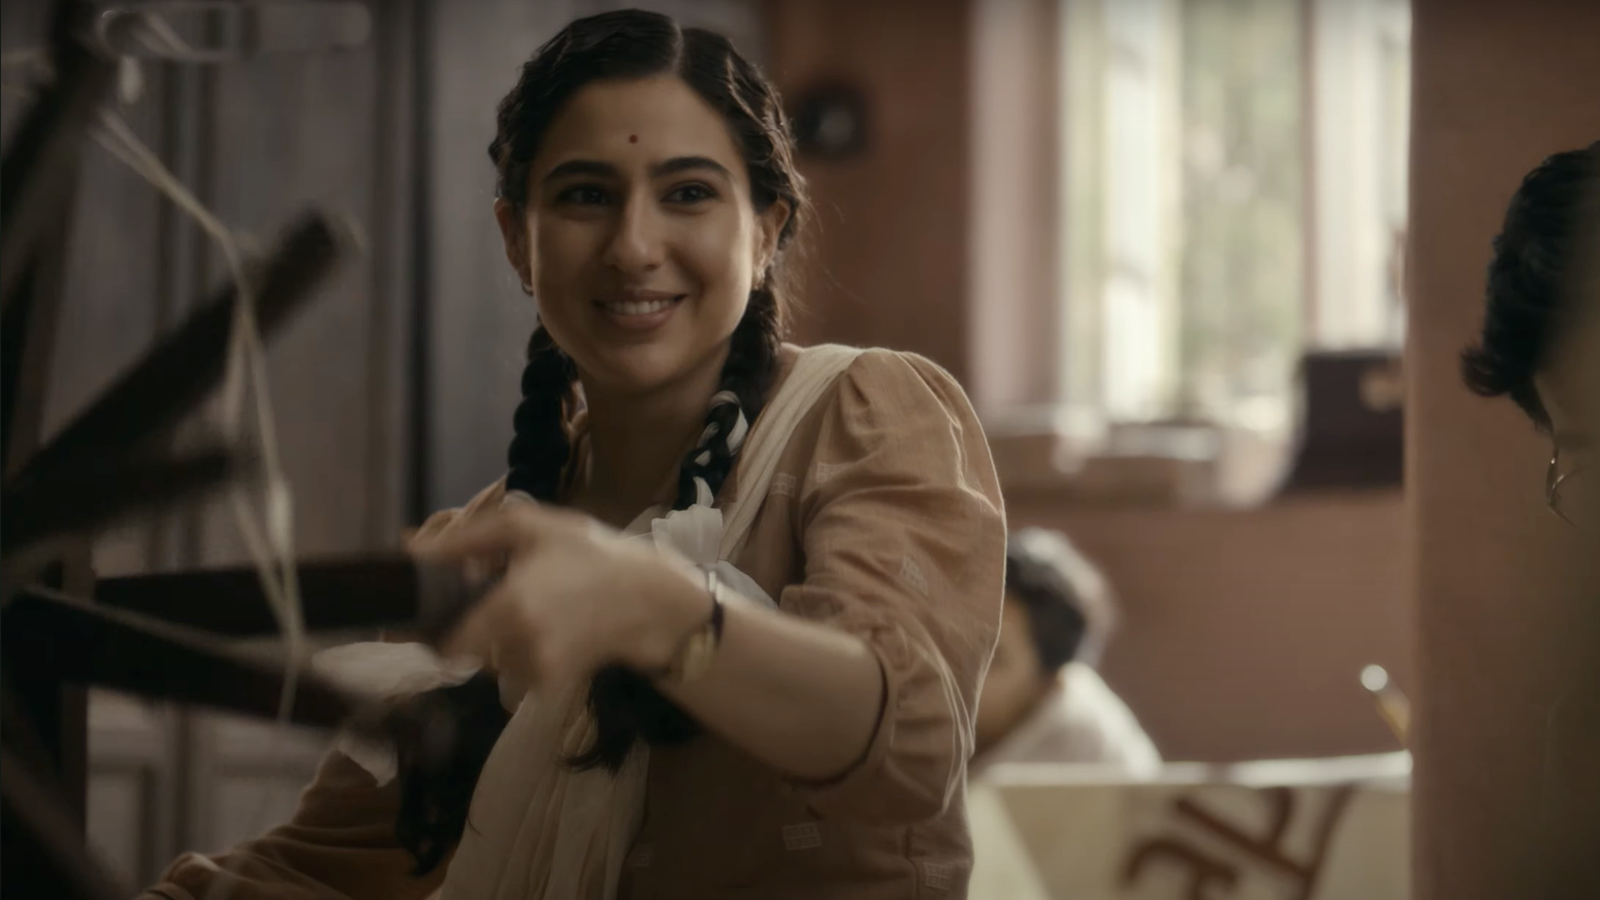 Ae Watan Mere Watan trailer: Sara Ali Khan becomes the voice that 'united  the nation' during Quit India movement | Bollywood News - The Indian Express